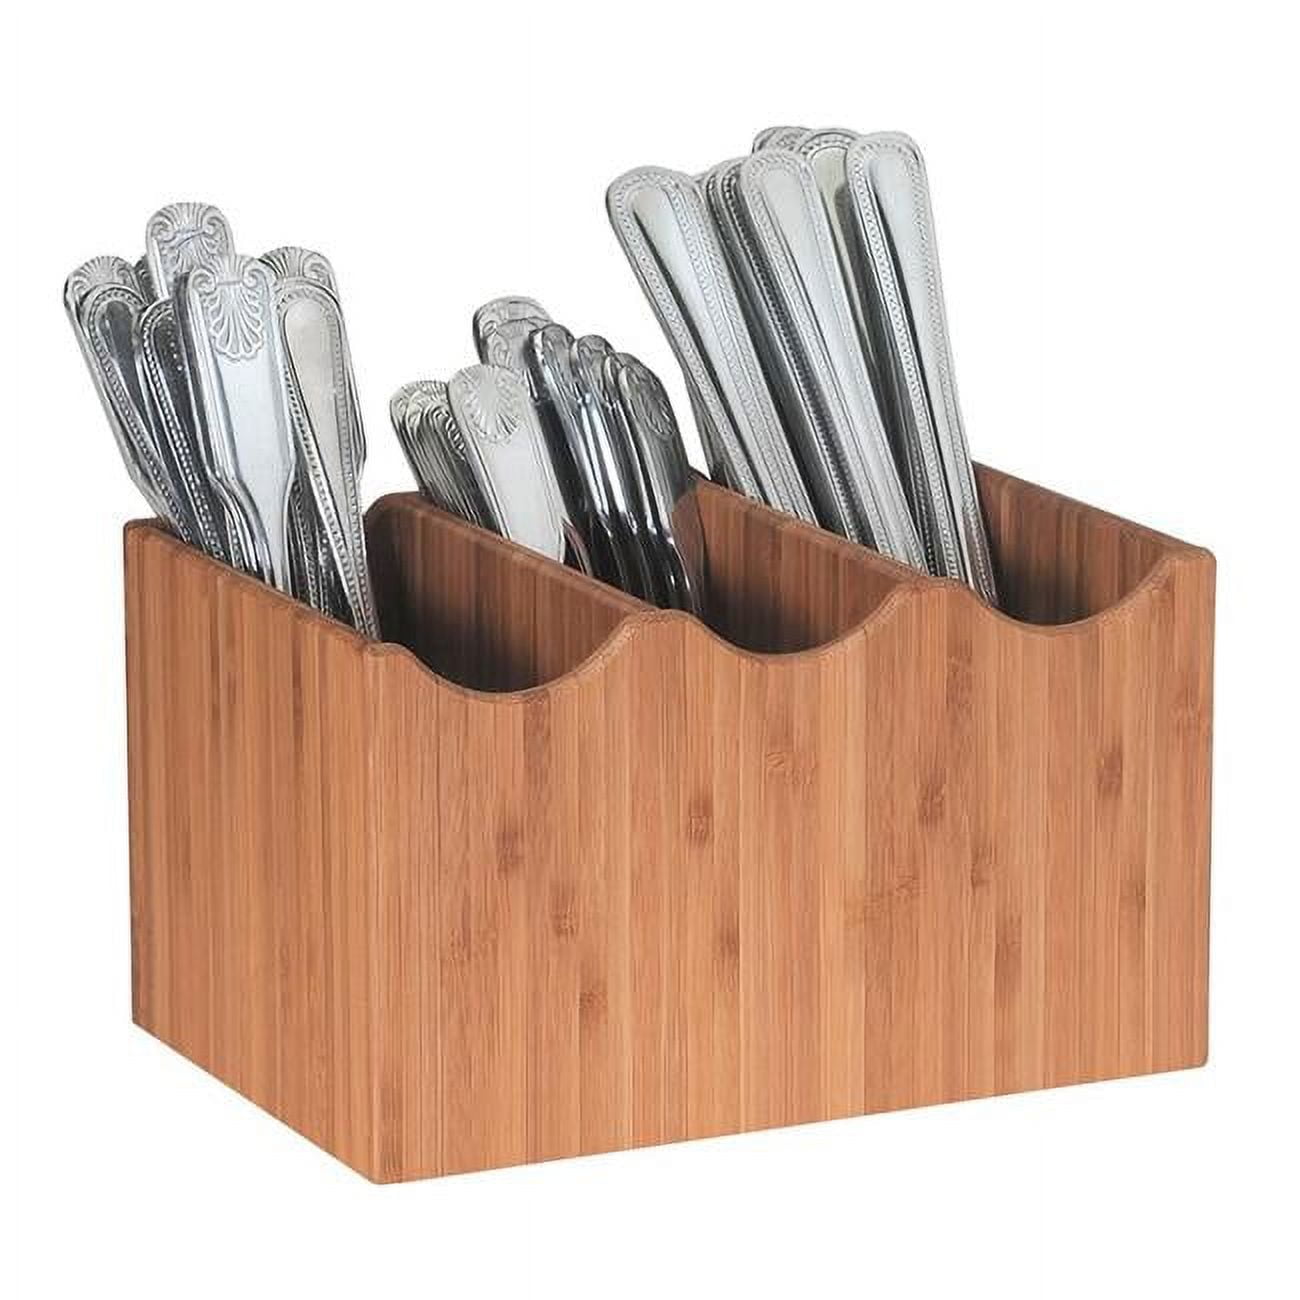 Picture of Cal Mil 1244 Three Slot Bamboo Flatware Holder - 8.25 x 5.5 x 4.75 in.